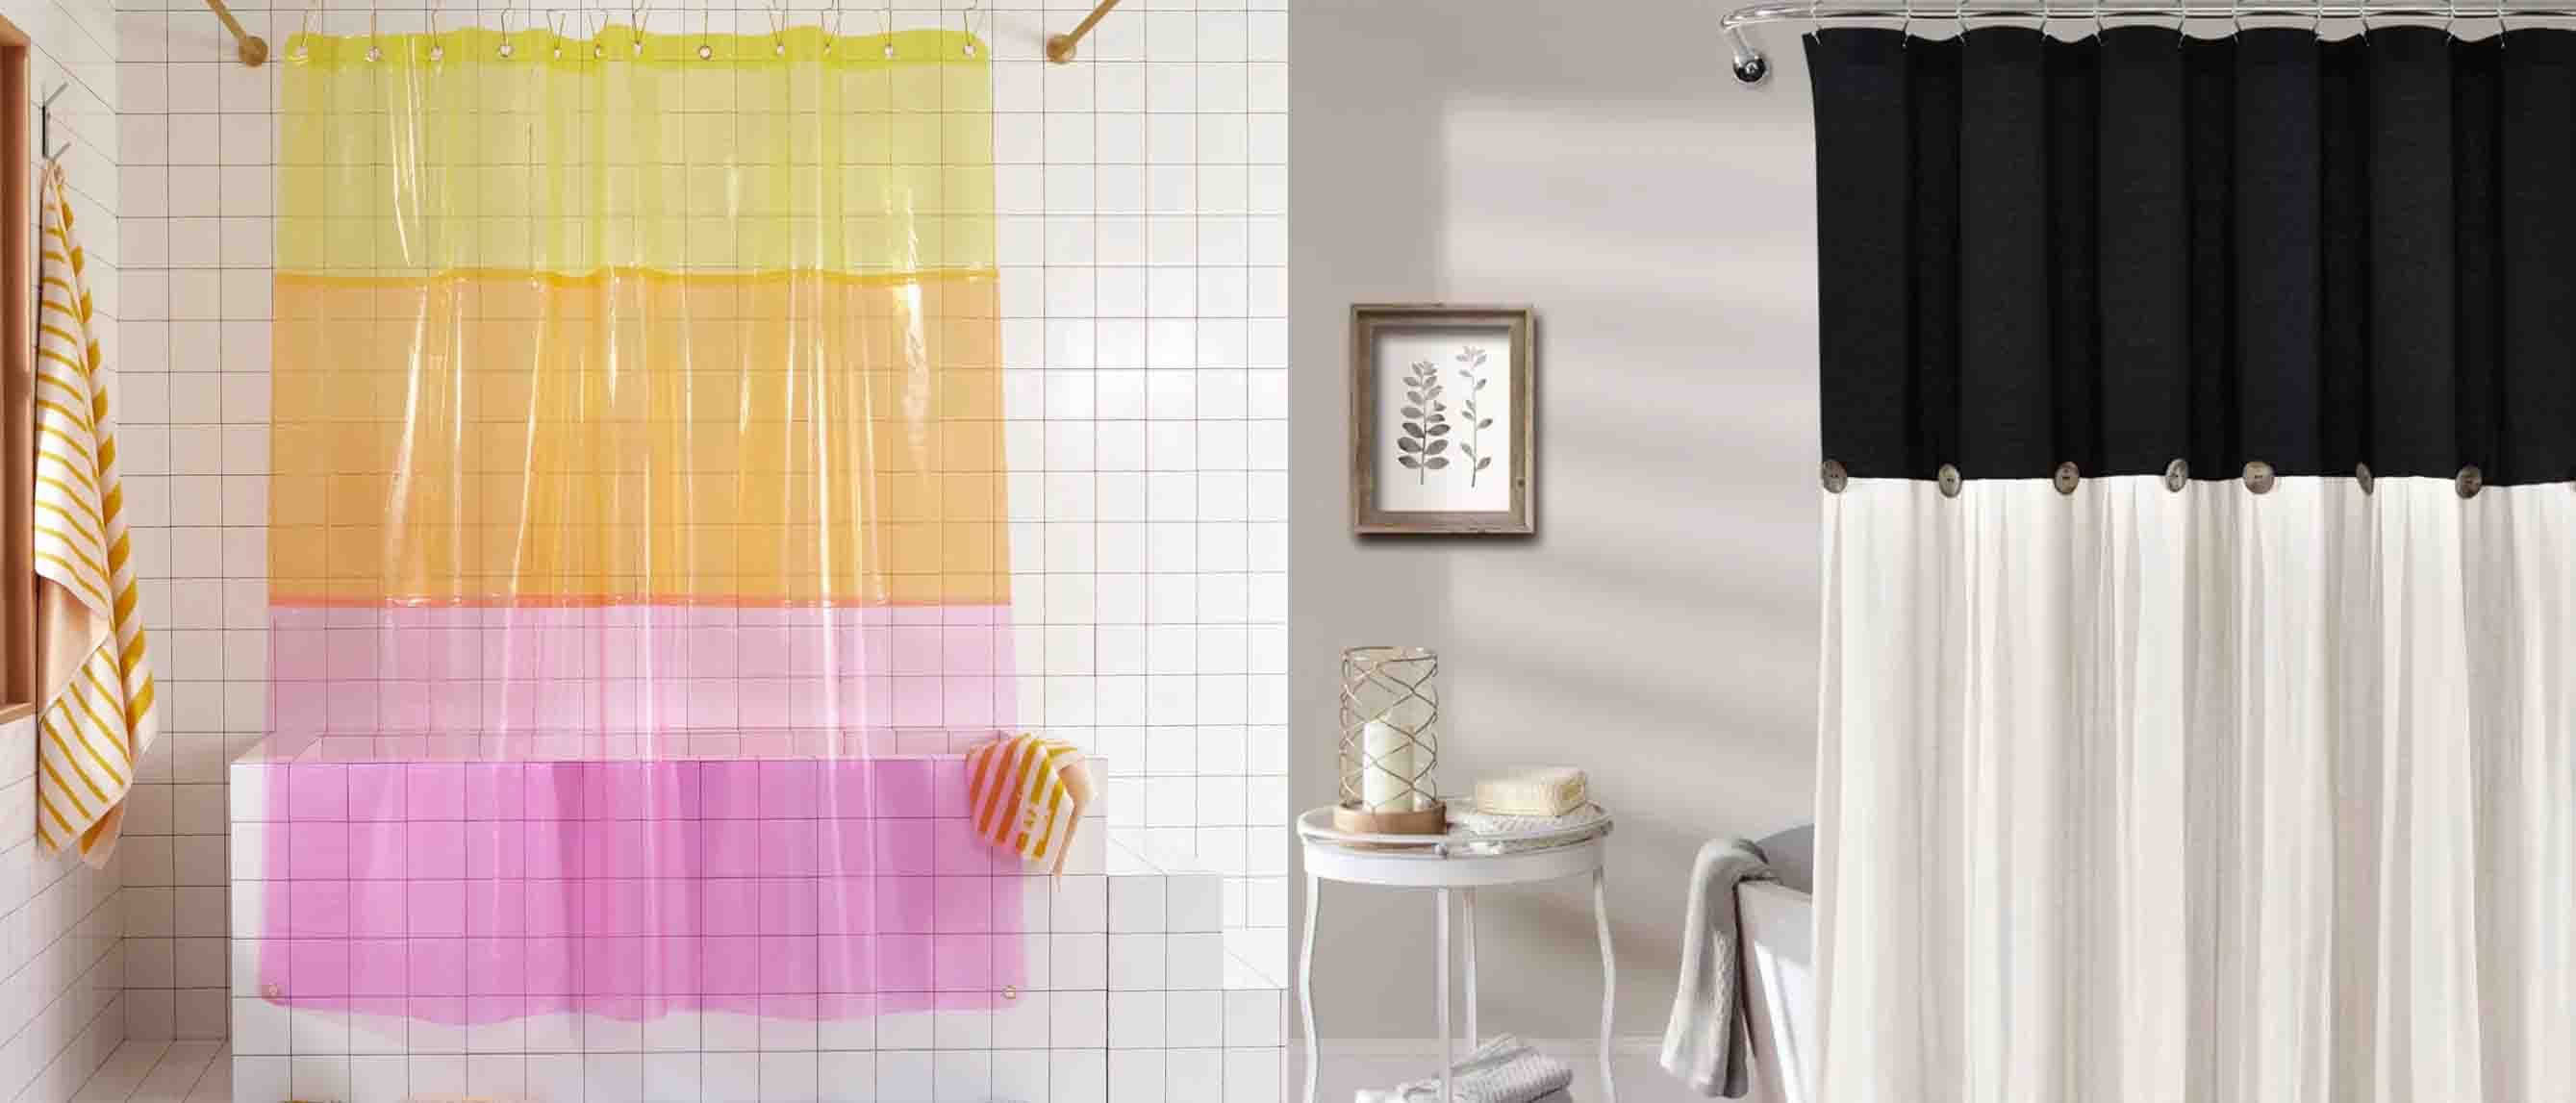 Image of two design of shower curtains